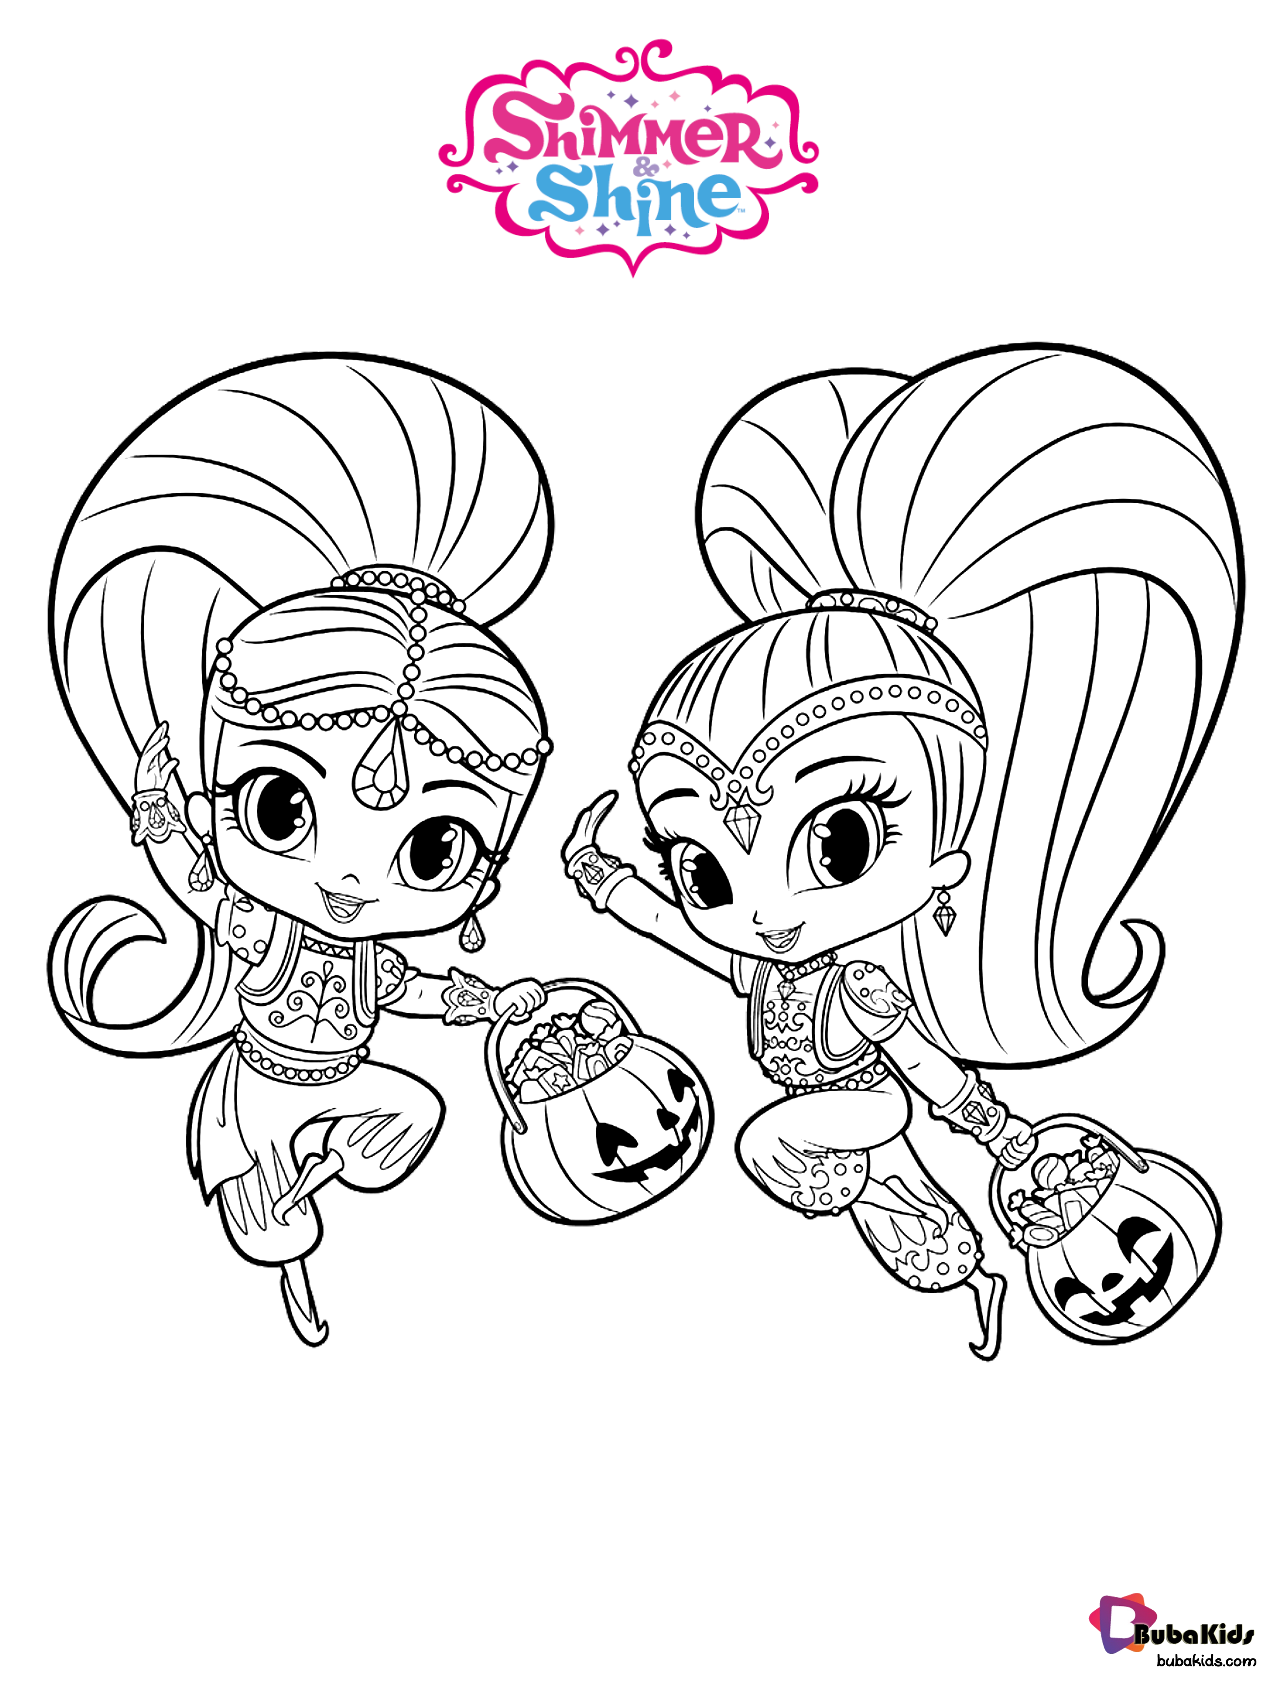 Shimmer and shine the twin genies free coloring page Wallpaper